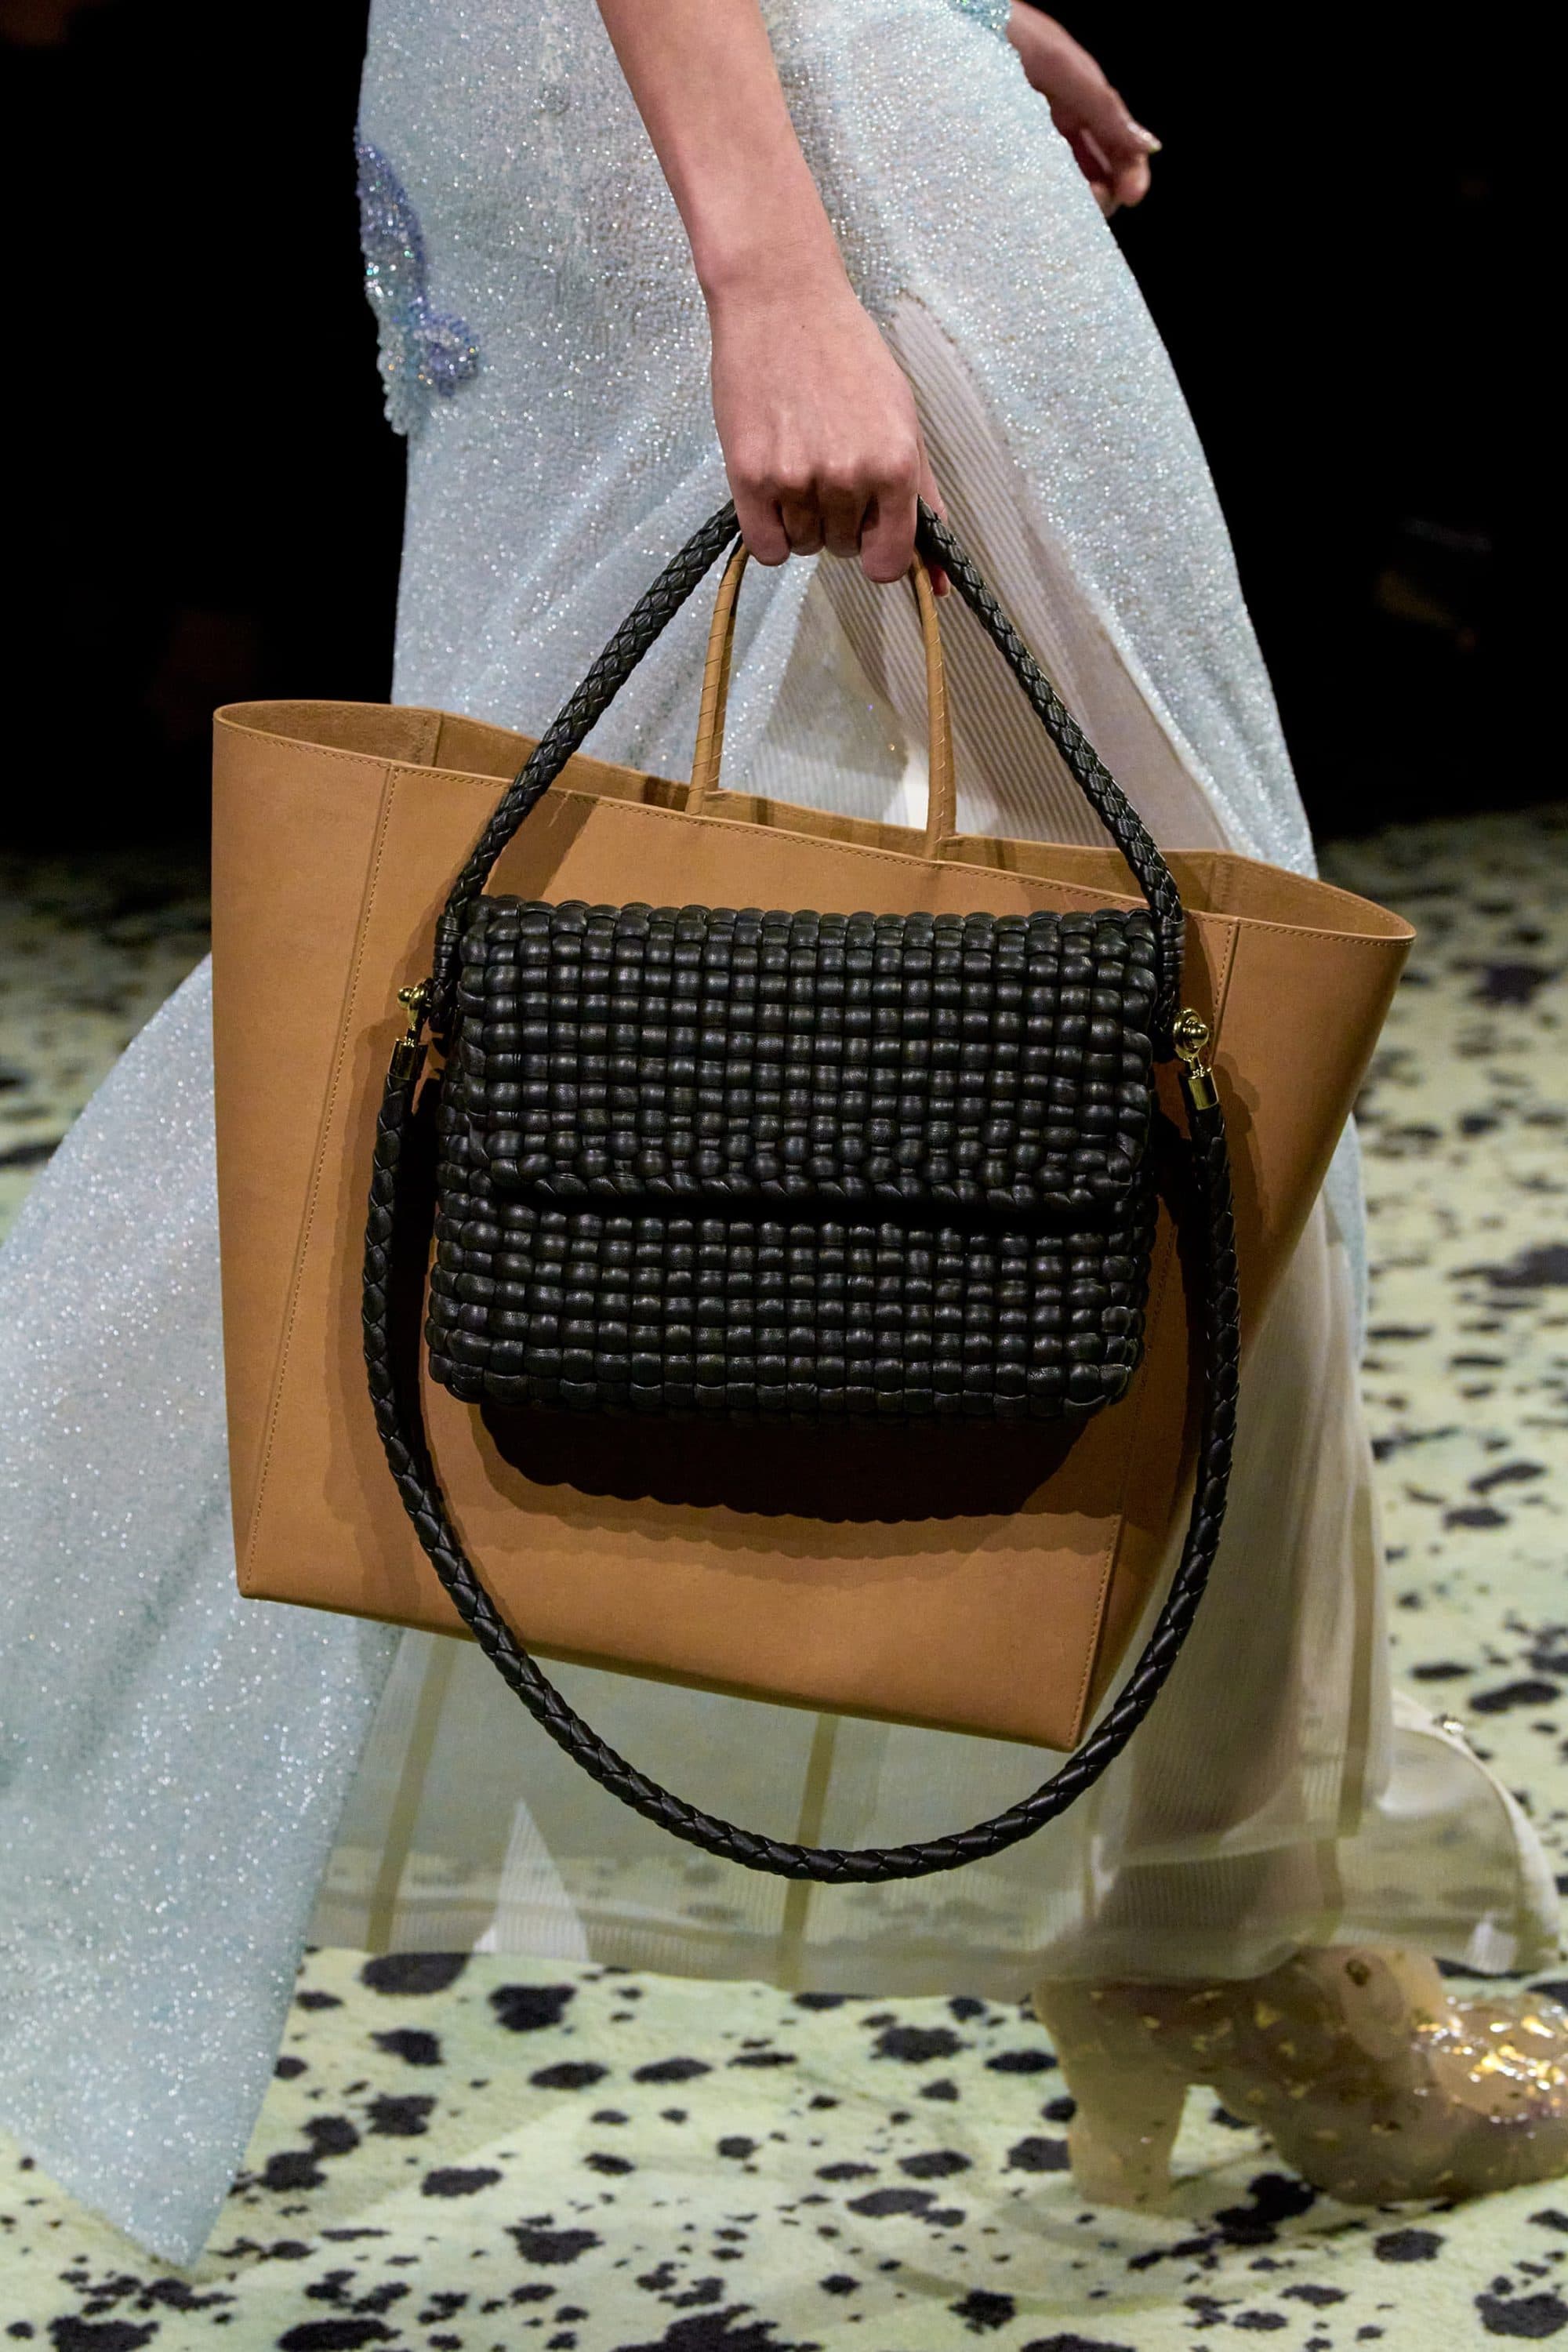 Double Bag Fall 2023 Accessories Fashion Trend | The Impression